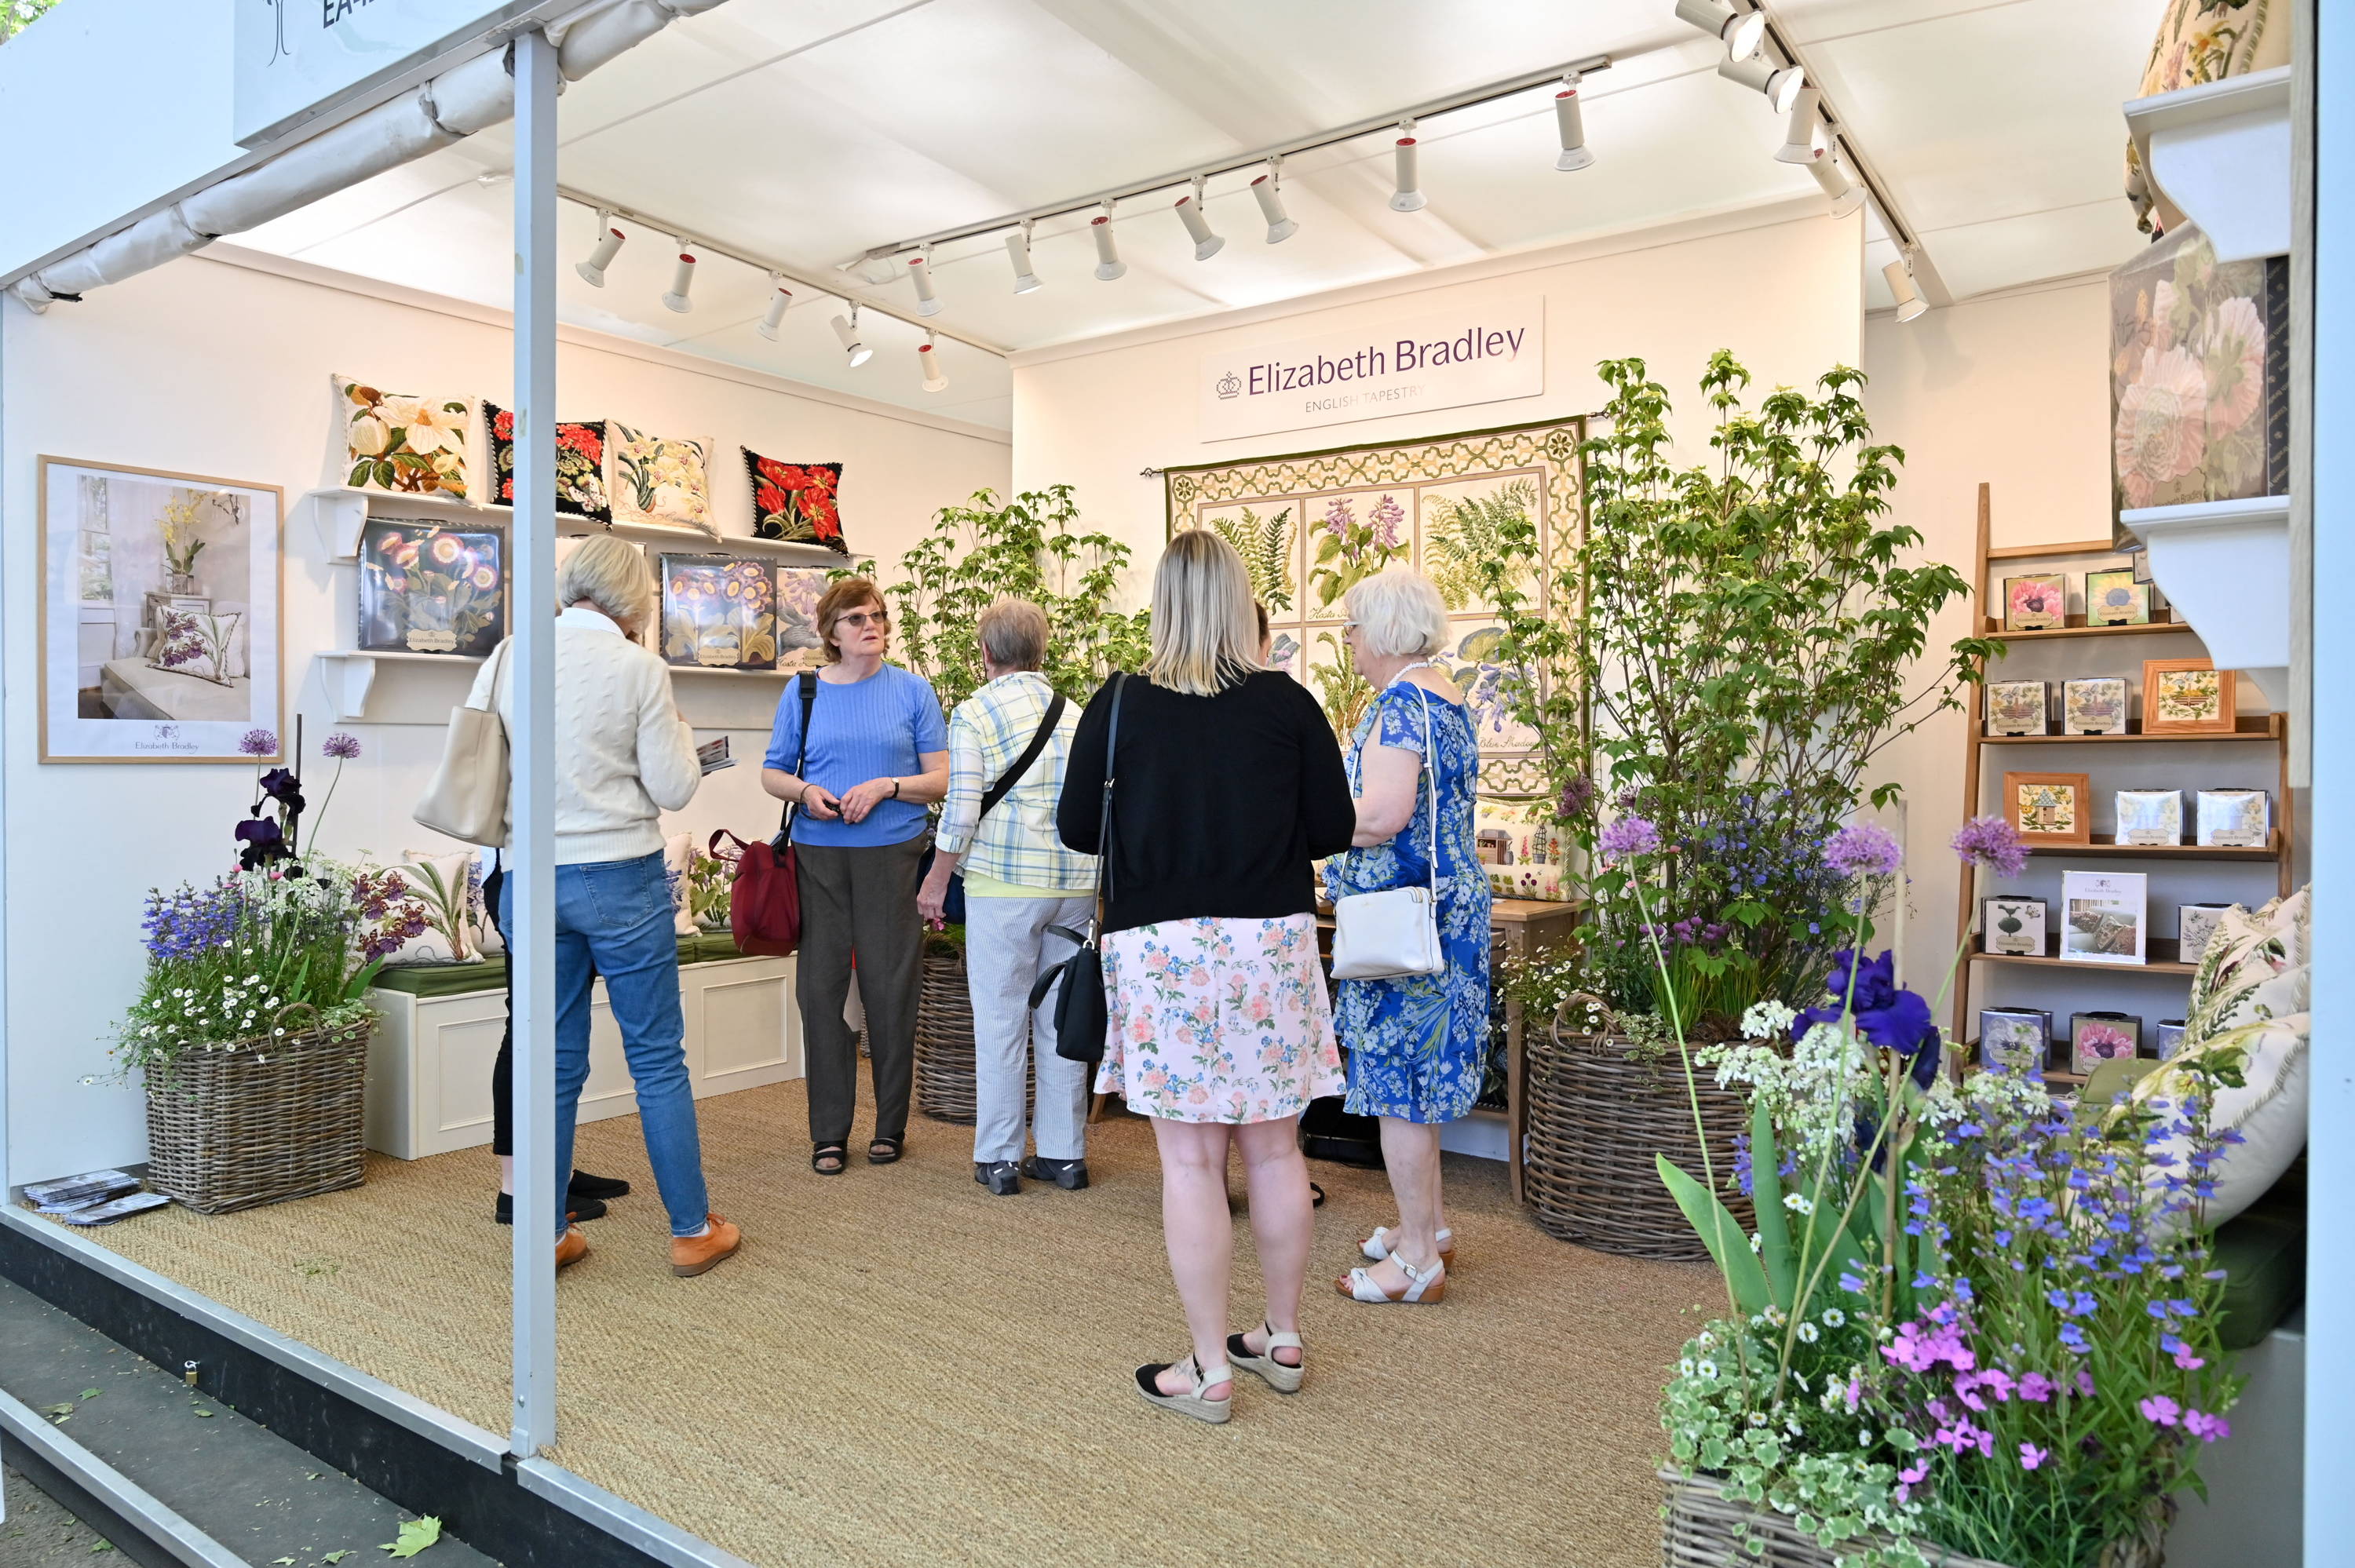 Customers talking at the Elizabeth Bradley Chelsea Flower Show booth